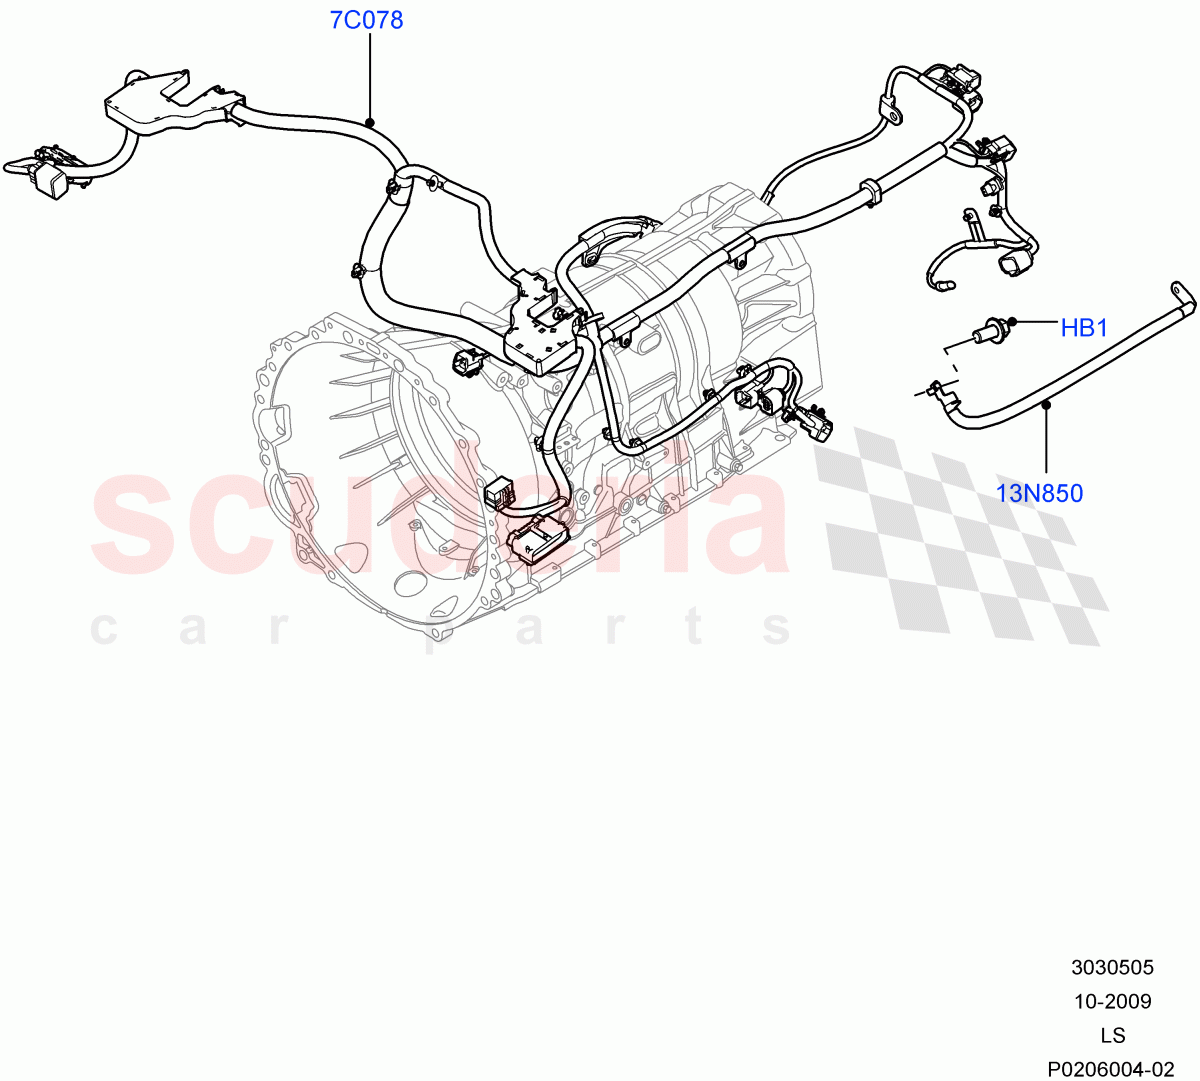 Electrical Wiring - Engine And Dash(Case Assy / Transmission)((V)FROMAA000001) of Land Rover Land Rover Discovery 4 (2010-2016) [4.0 Petrol V6]